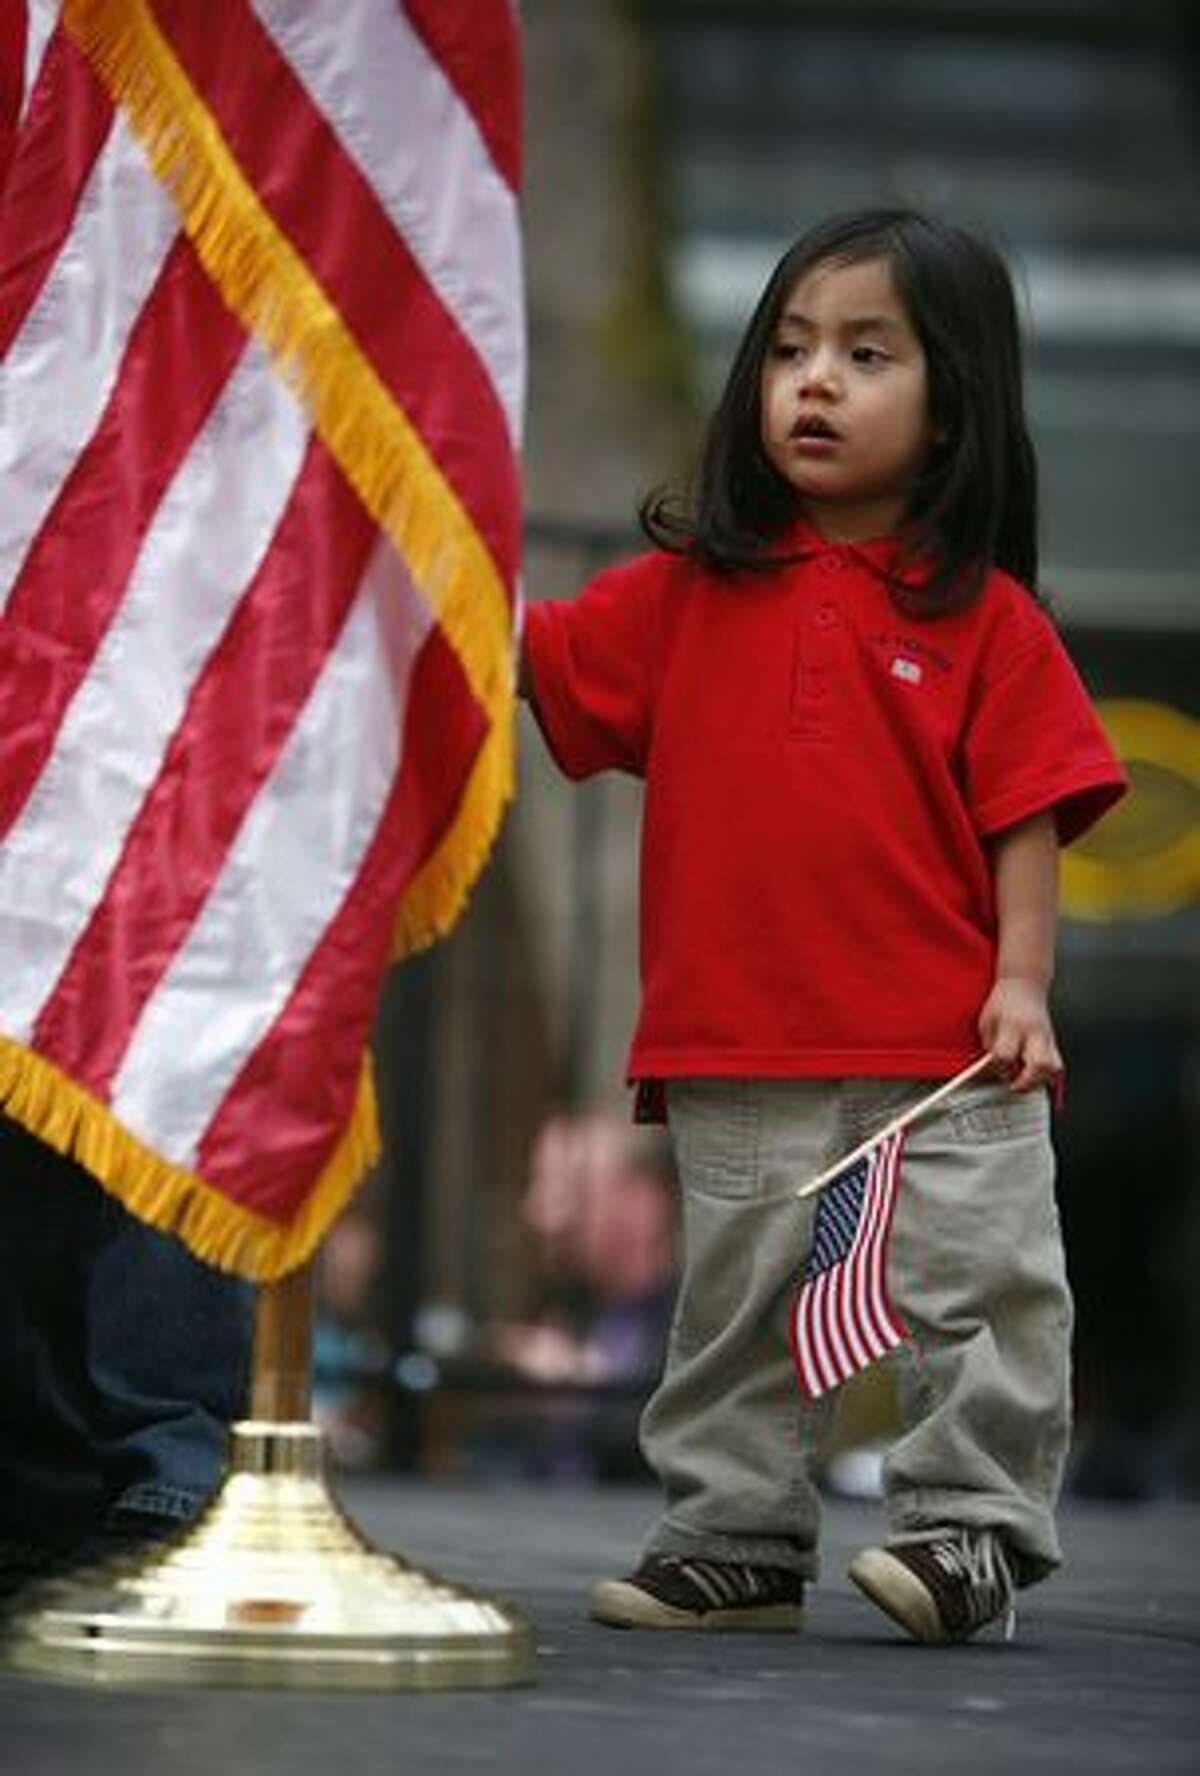 Ivan Hernandez, 2, stands near the podium as his brother Irais, 11, speaks during an immigration reform rally in Seattle's Occidental Park on Saturday April 10, 2010. The boys' dad was detained by immigration officials and may be sent back to his native Mexico. Speaker Pramila Jayapal, executive director of OneAmerica, said her organization is demanding that a bill be introduced in congress for immigration reform by May 1st.